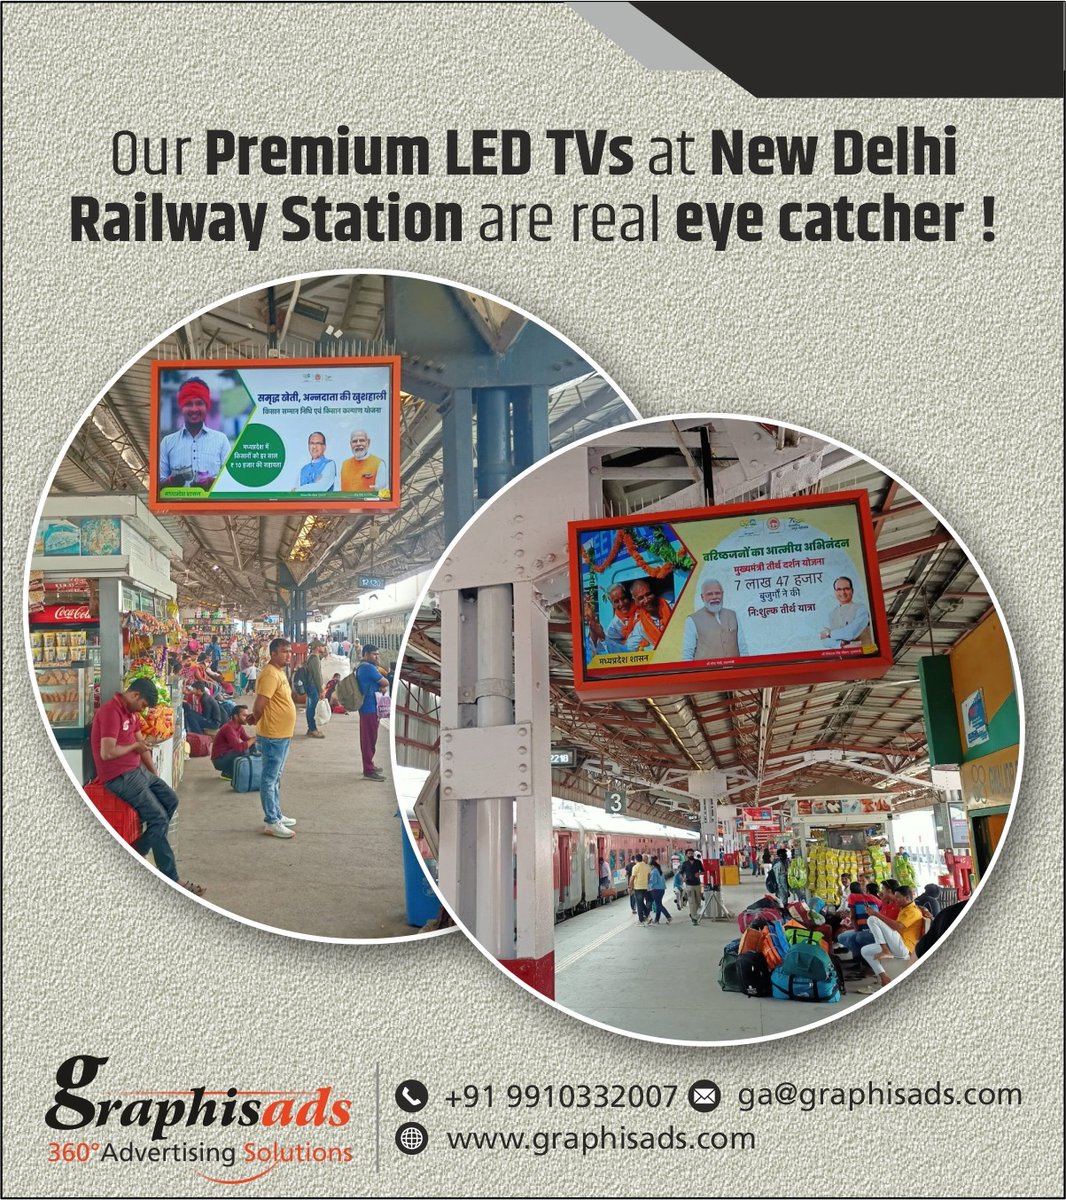 LED TVs installed at strategic points at all platforms of New Delhi Railway Station give best mileage to Brands at economical cost.

#NewDelhiRailwayStation #MPGovt #madhyapradeshgovernment #outdooradvertising #OOHMedia #trainadvertising #Digitalpromotion #graphisadslimited